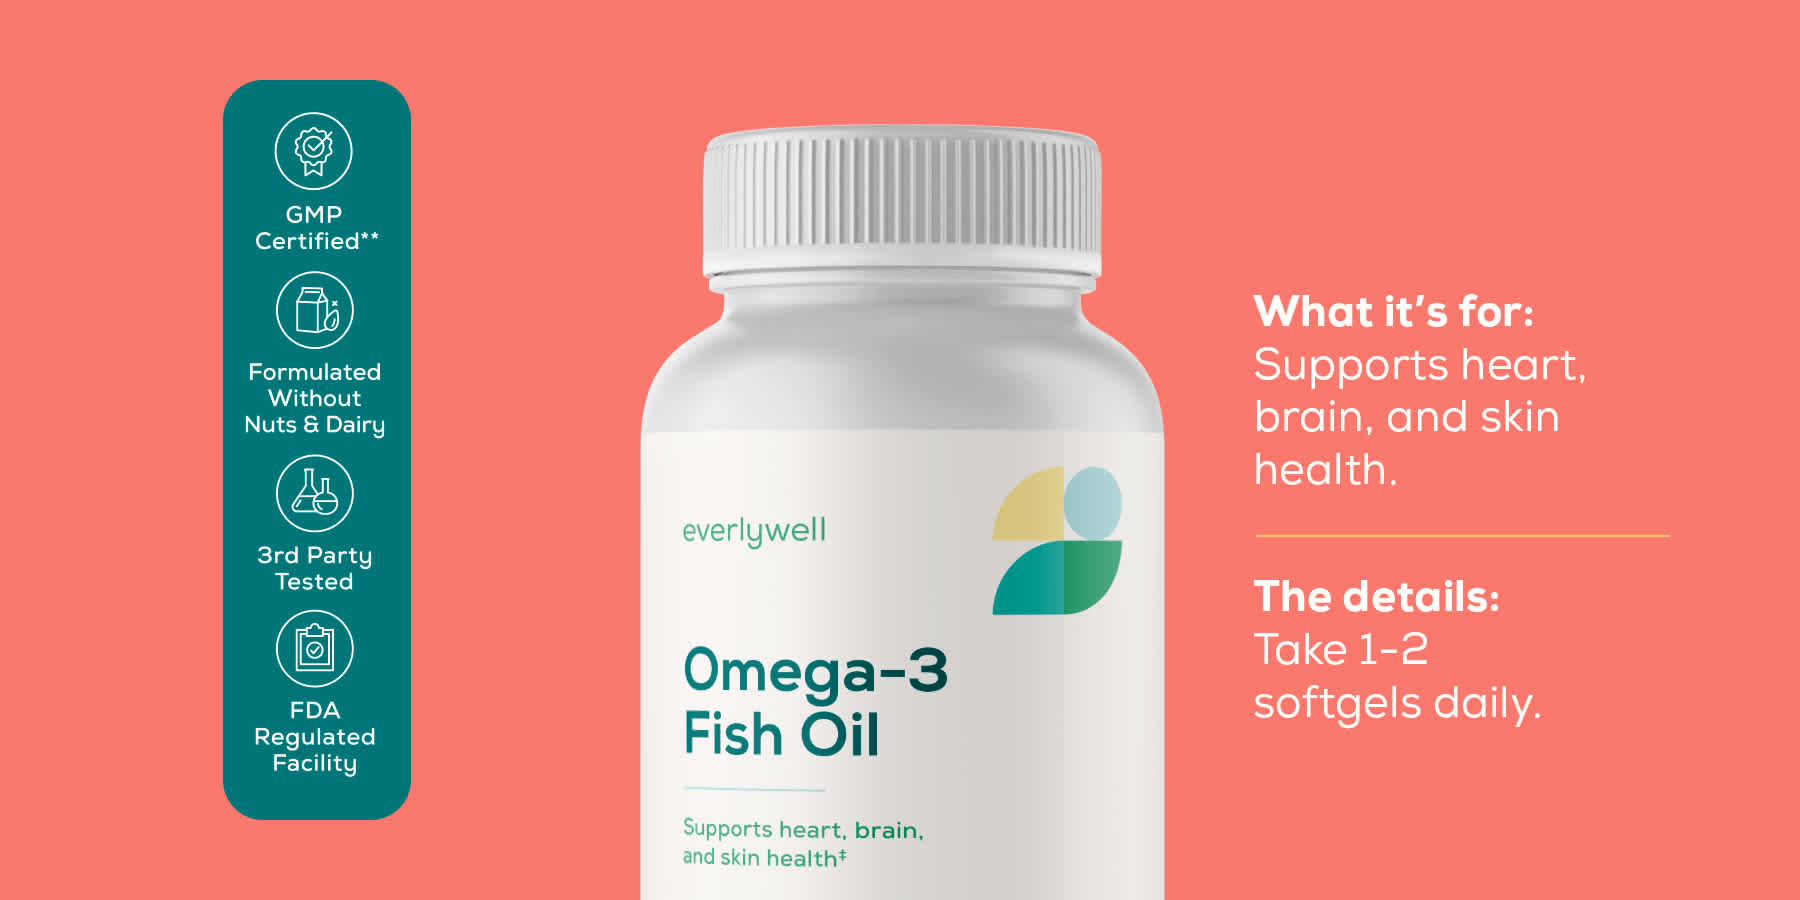 Bottle of Everlywell Omega-3 Fish Oil supplements against an orange background